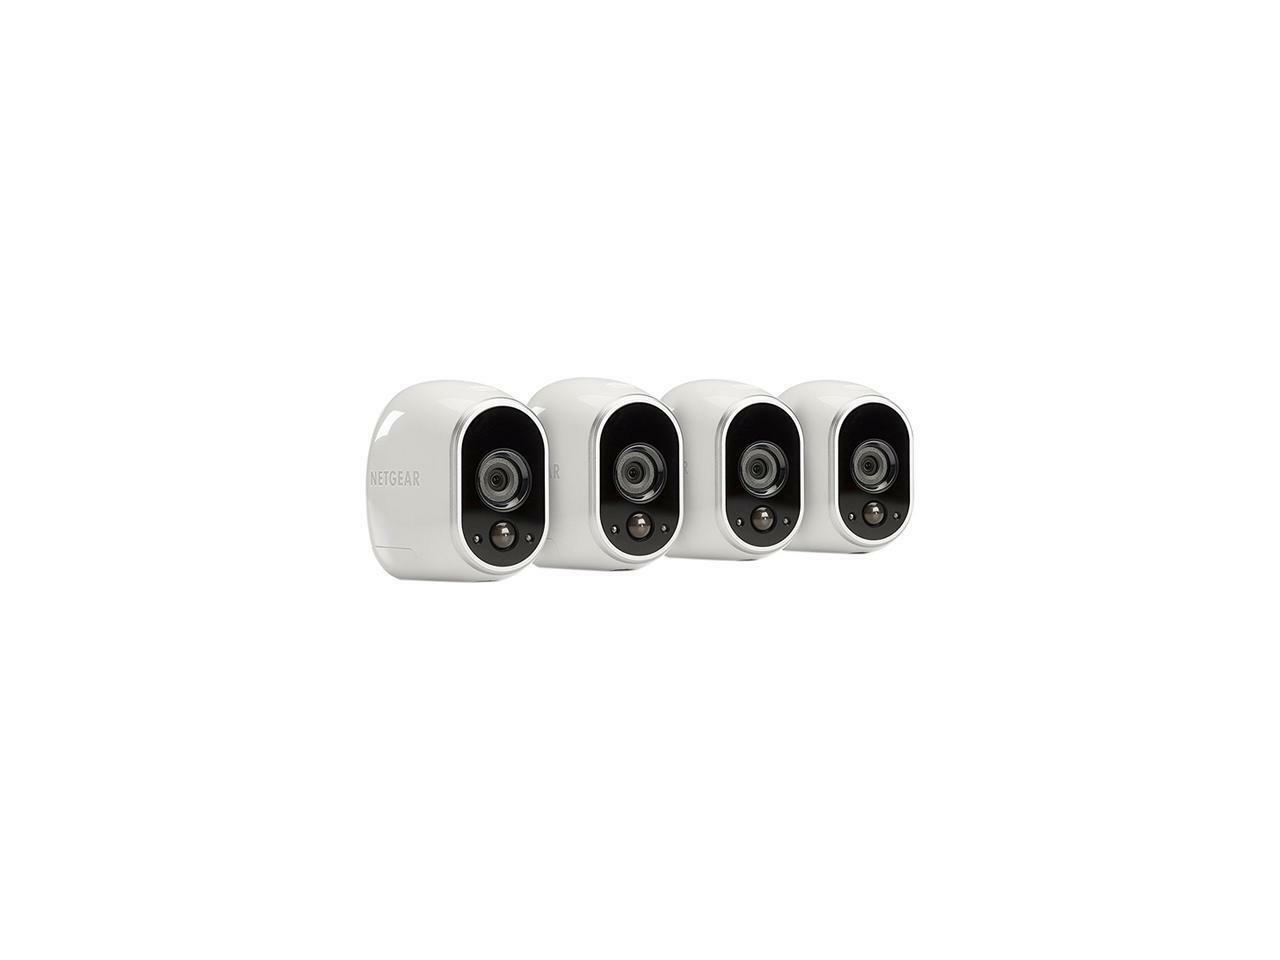 Arlo VMS3430-100NAR HD Wireless 4 Camera Security System - Certified Refurbished